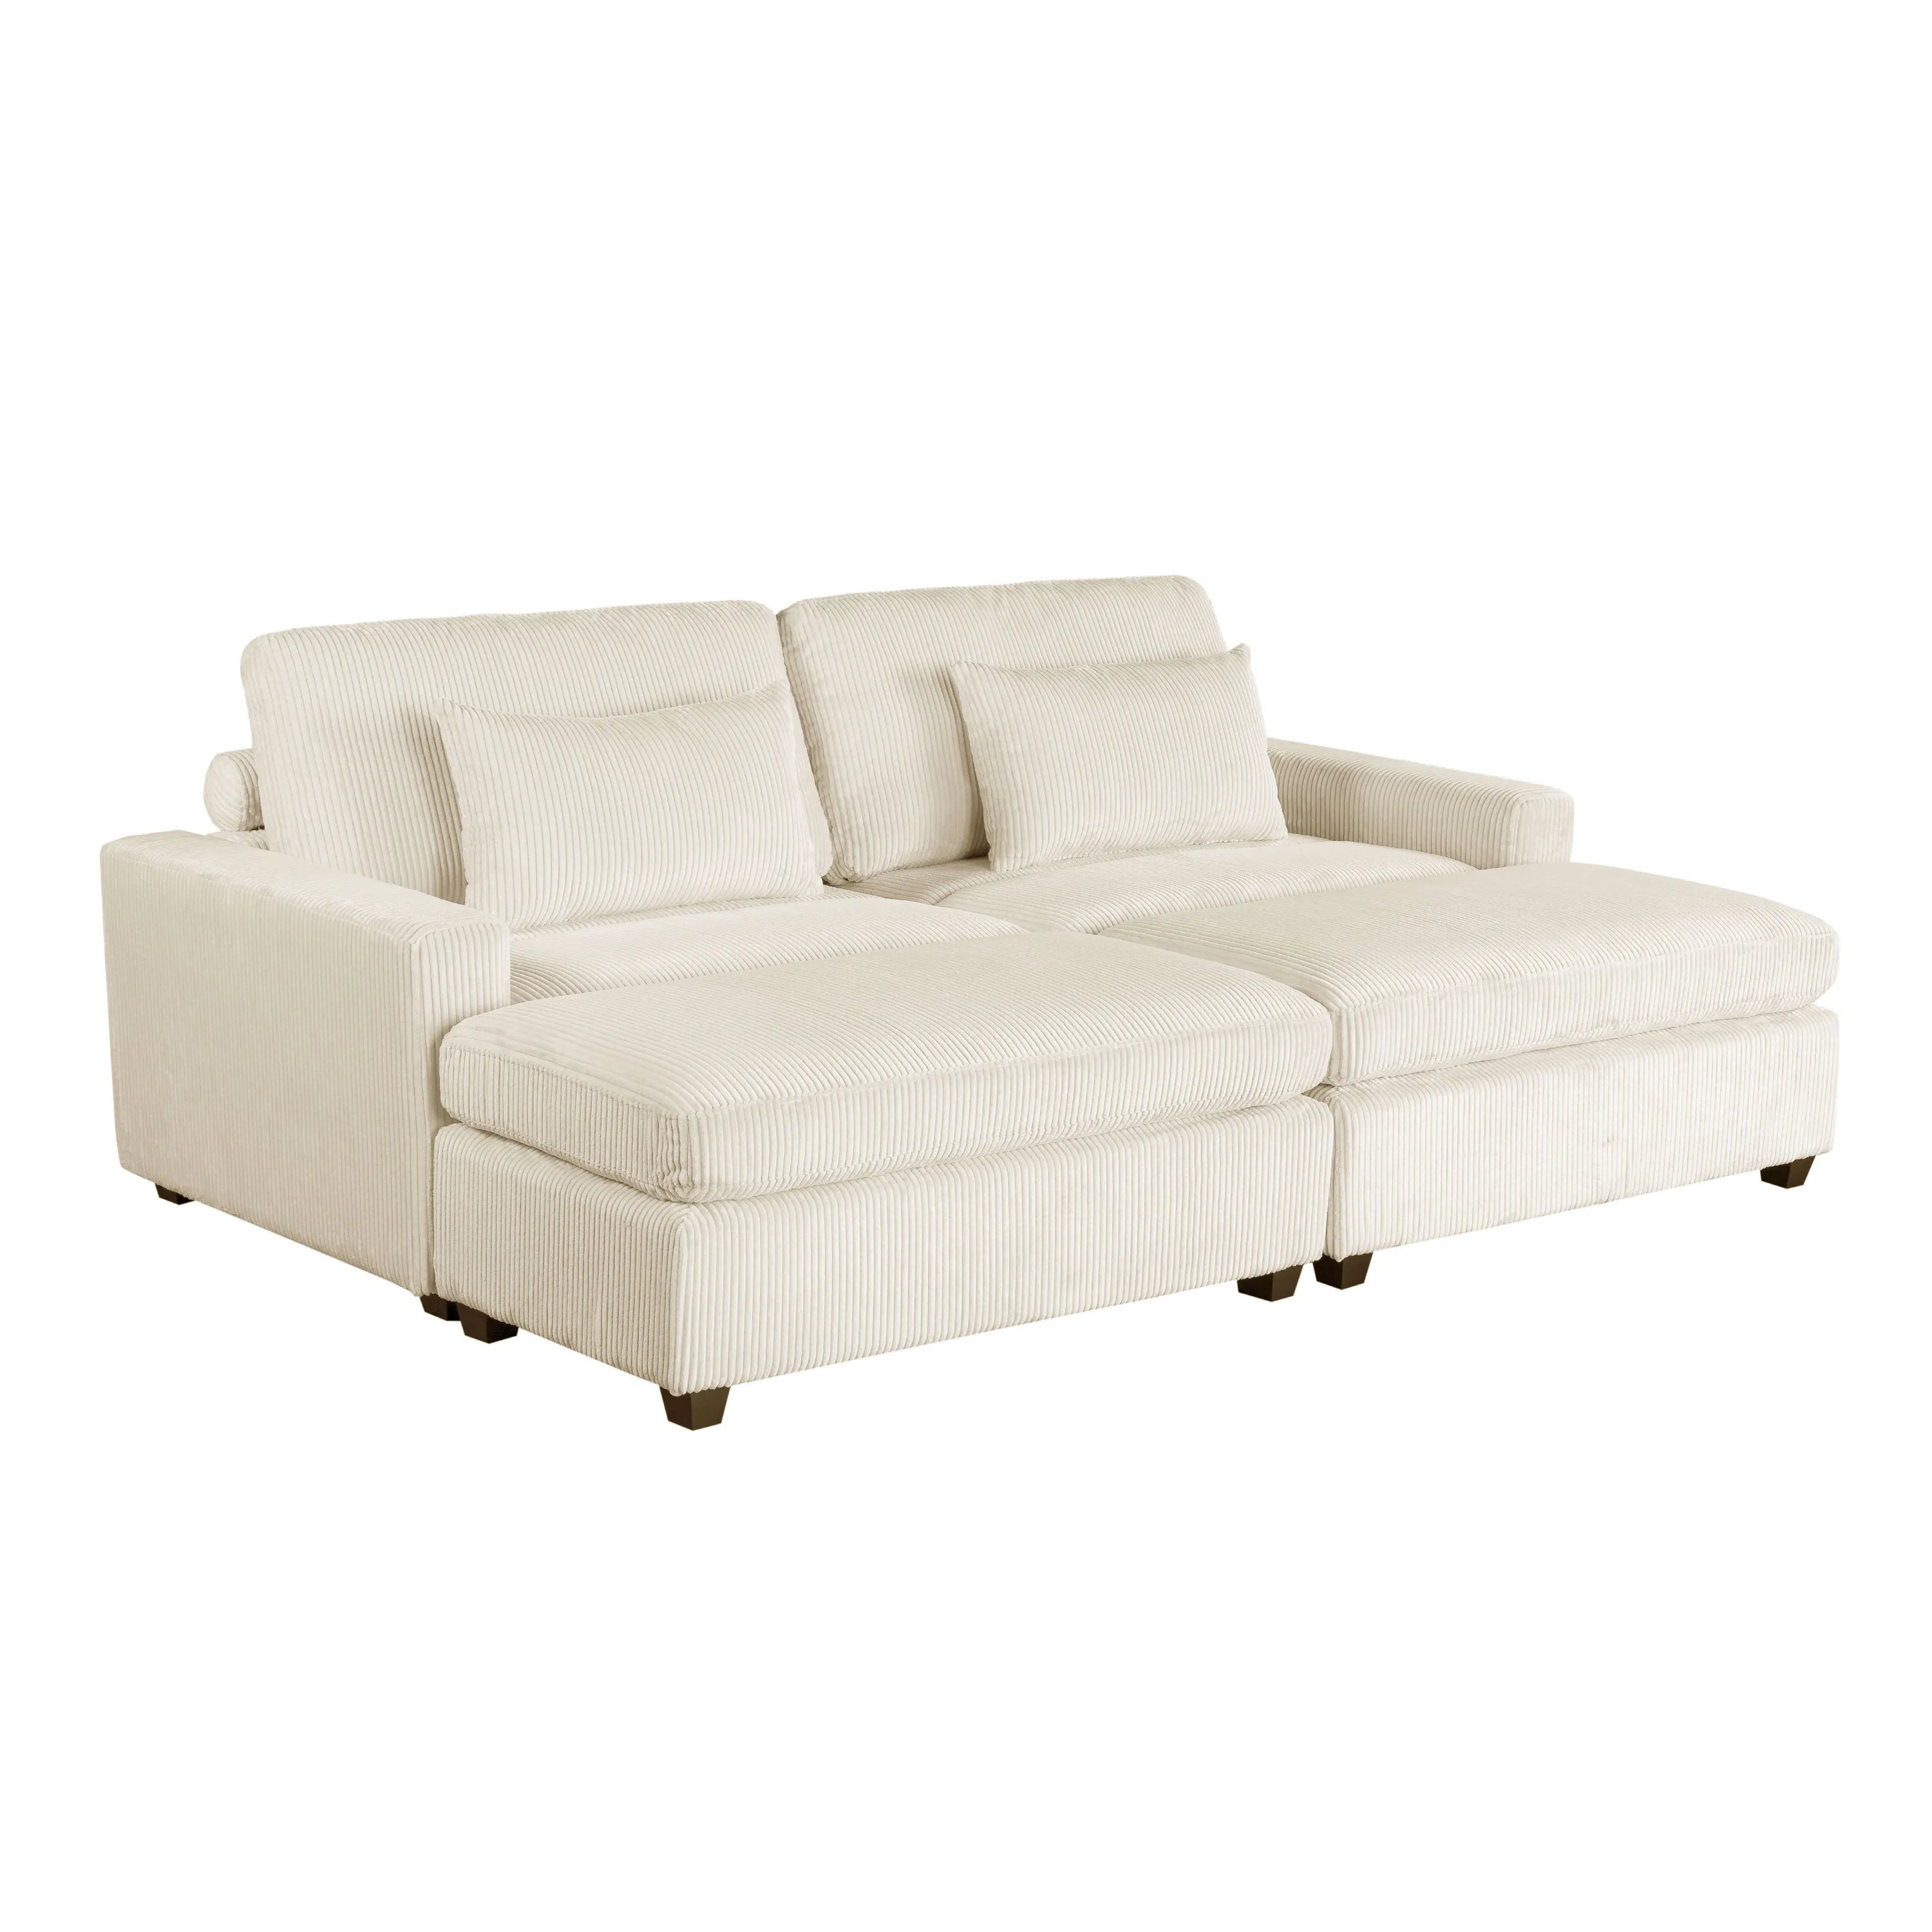 Louie Corduroy Sofa, Deep Sectional Couch with Ottoman - Beige